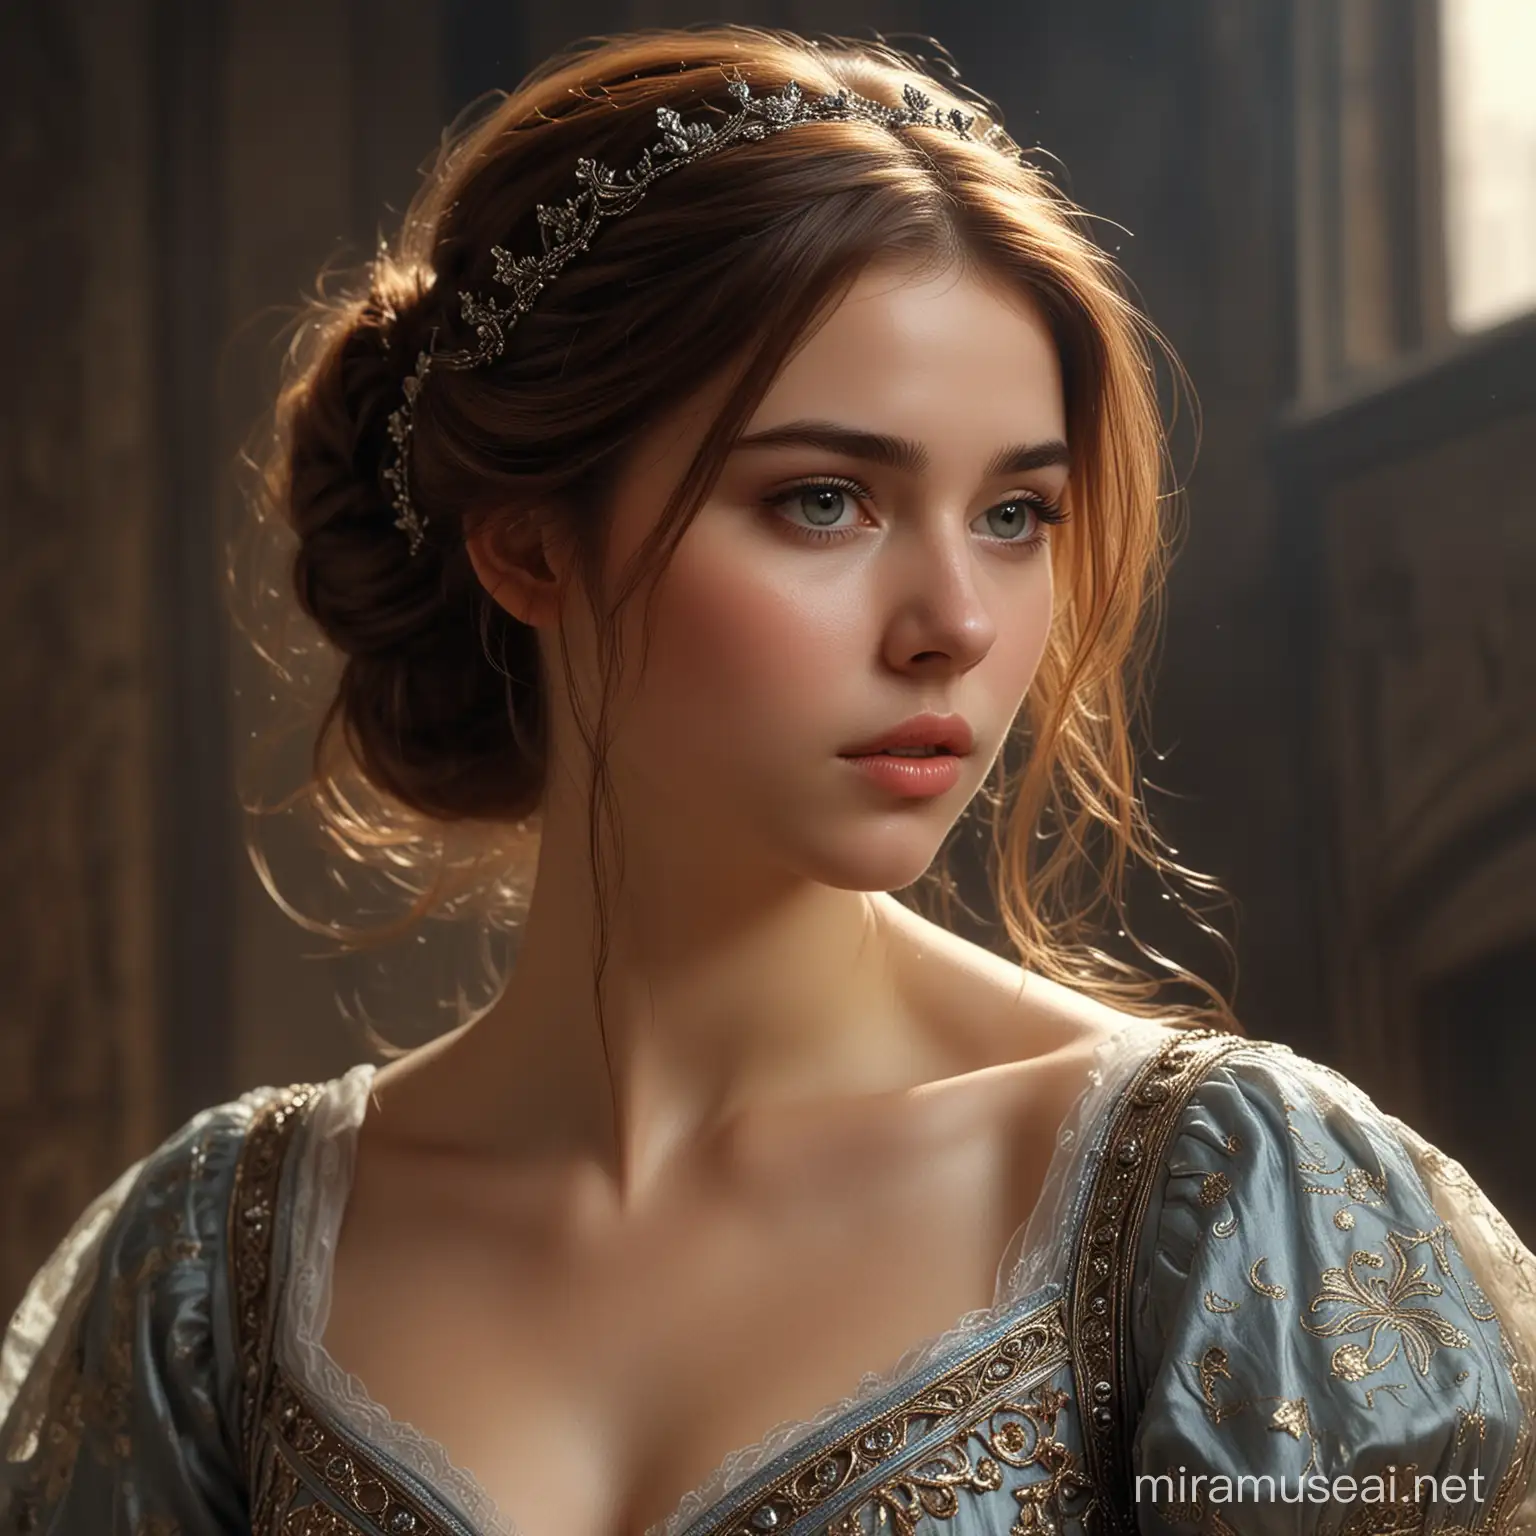 European Aesthetics Enchanting Young Girl with Detailed Airbrushed Beauty and Cinematic Elegance